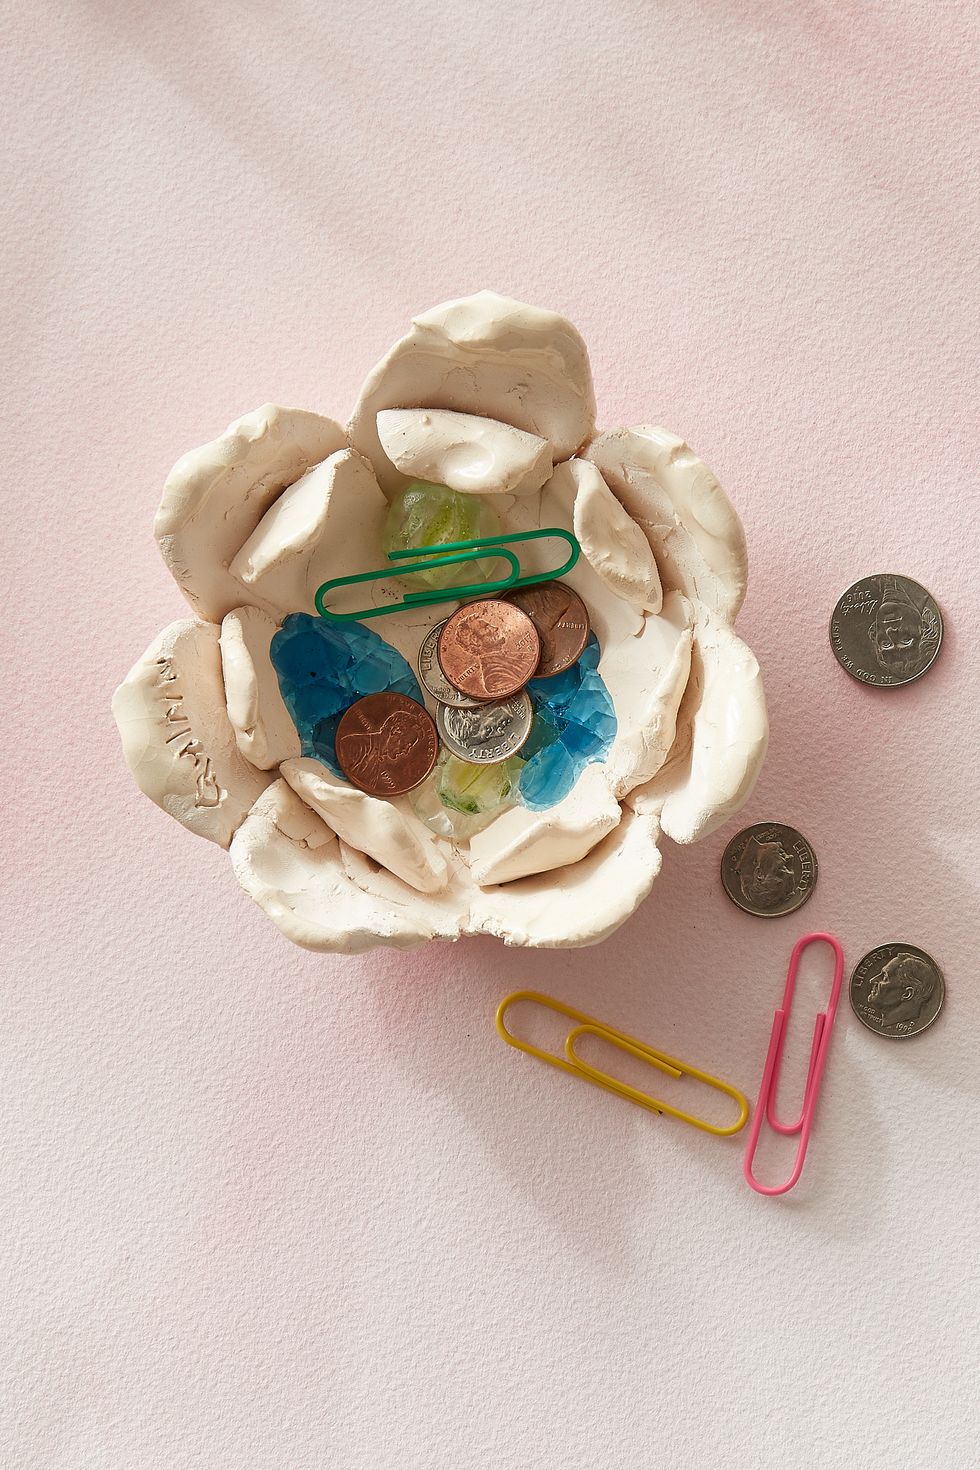 DIY Mother's Day Gifts with a STEM Twist